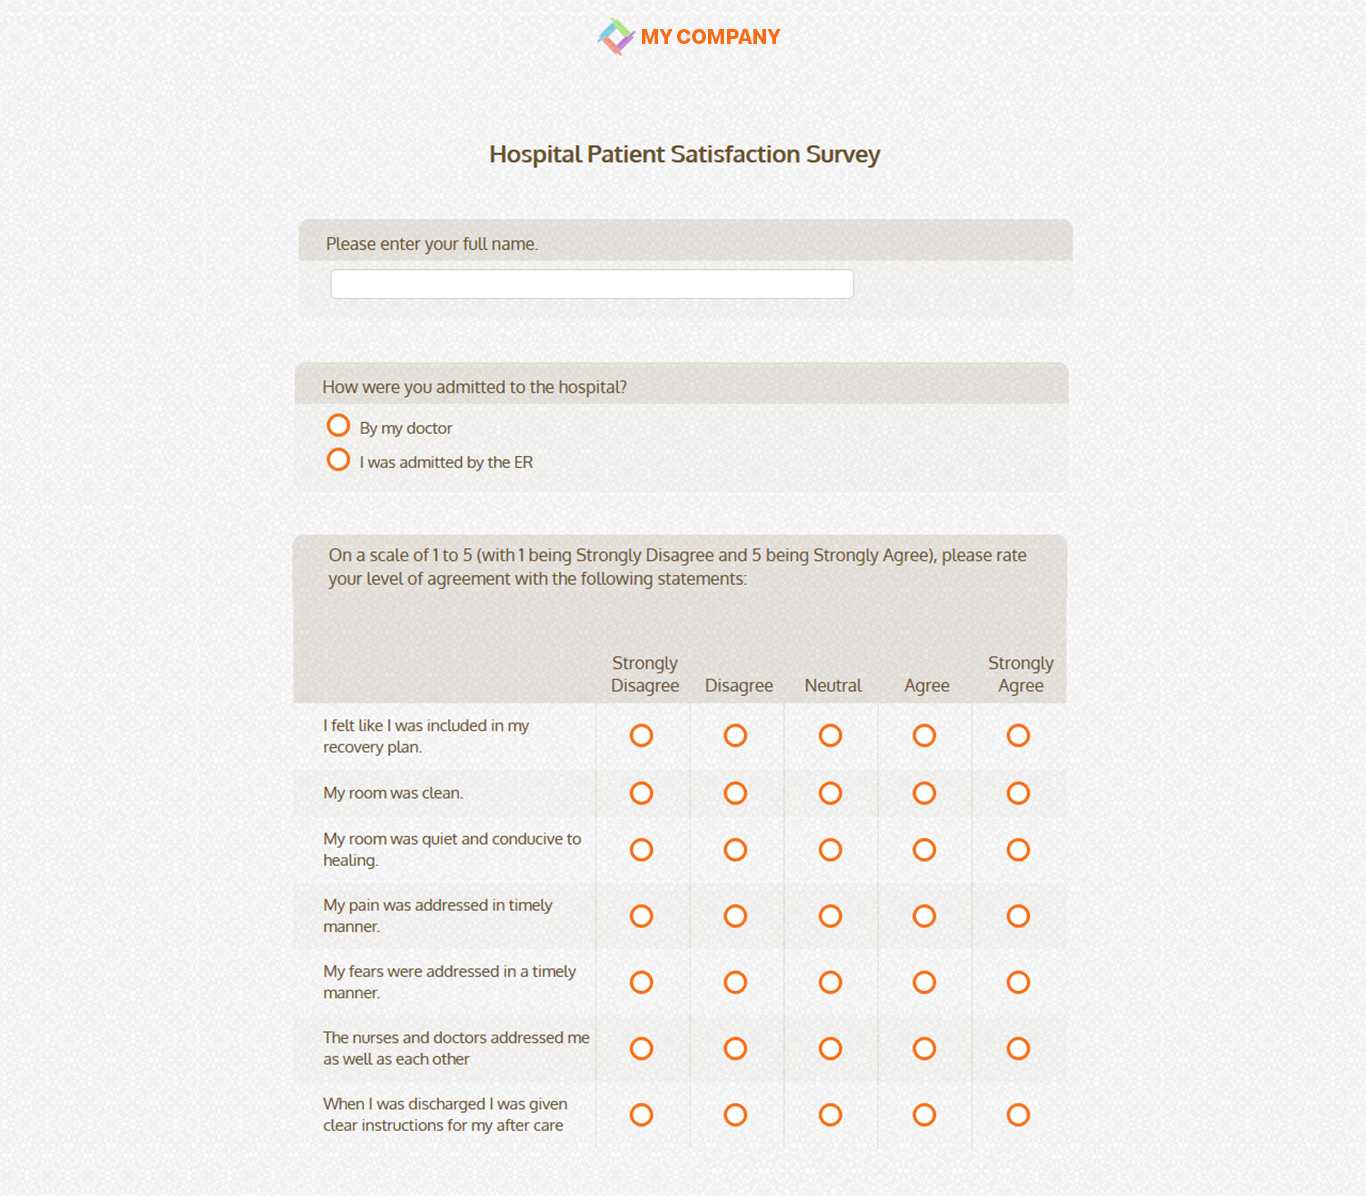 Patient Satisfaction Survey Template [21 Questions] | Sogosurvey With Customer Satisfaction Report Template